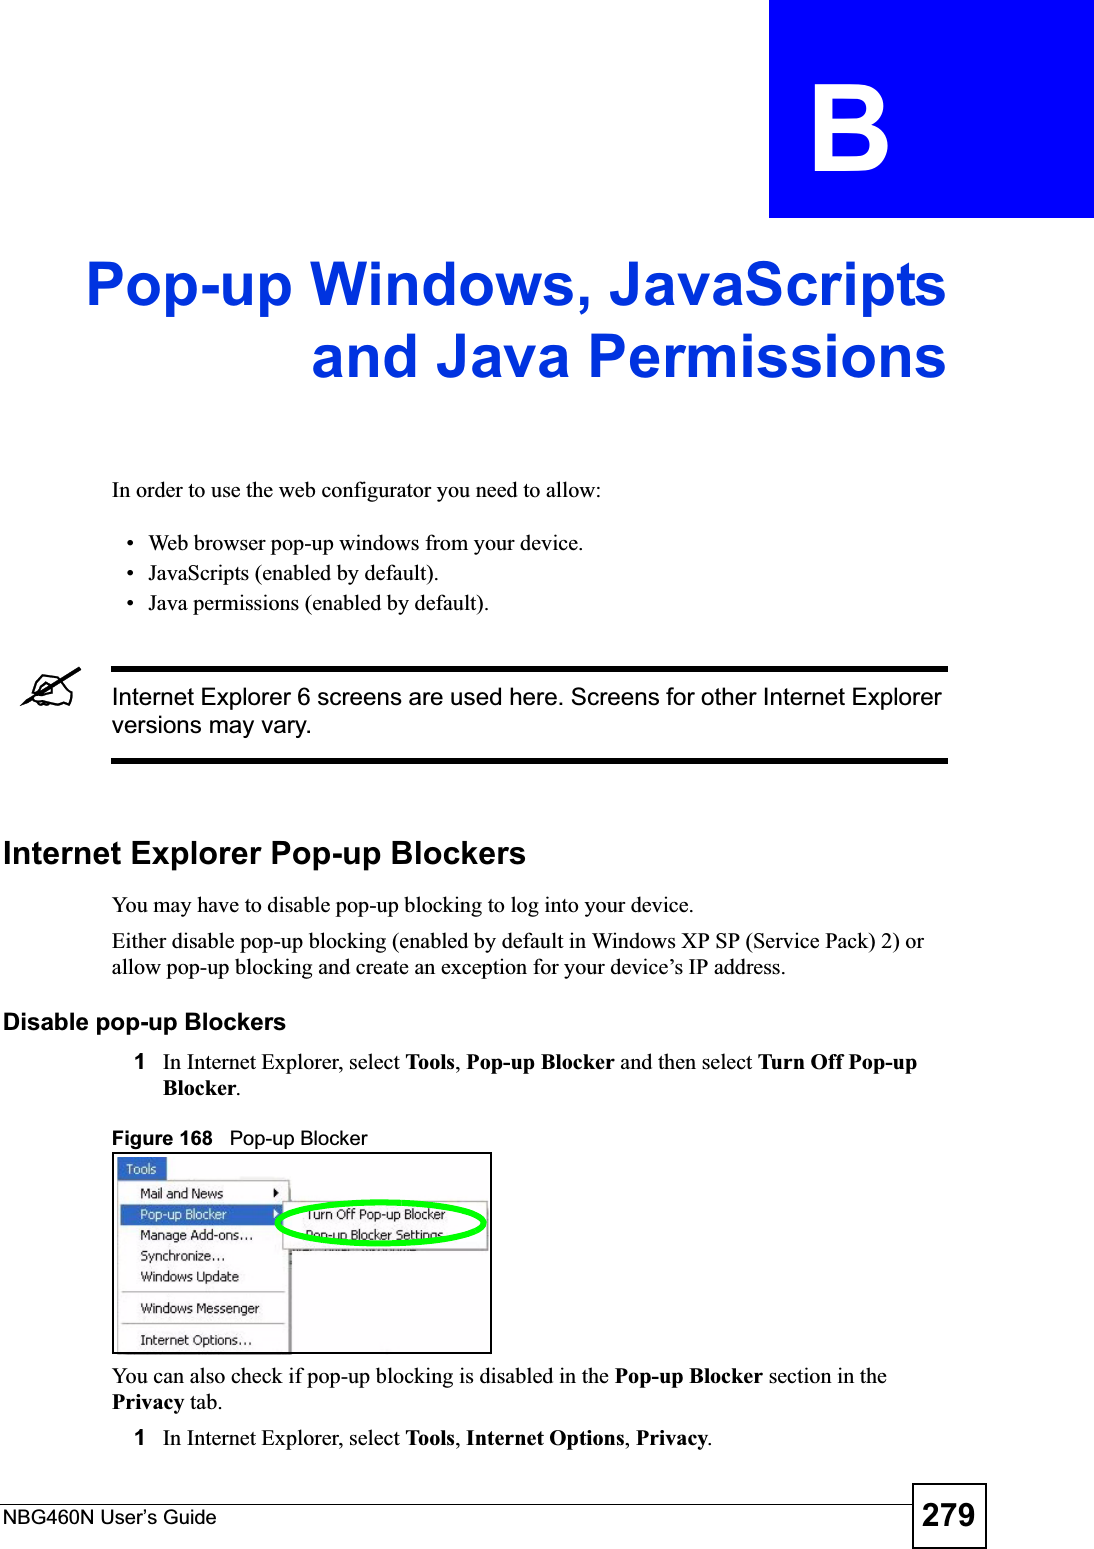 NBG460N User’s Guide 279APPENDIX  B Pop-up Windows, JavaScriptsand Java PermissionsIn order to use the web configurator you need to allow:• Web browser pop-up windows from your device.• JavaScripts (enabled by default).• Java permissions (enabled by default).&quot;Internet Explorer 6 screens are used here. Screens for other Internet Explorer versions may vary.Internet Explorer Pop-up BlockersYou may have to disable pop-up blocking to log into your device. Either disable pop-up blocking (enabled by default in Windows XP SP (Service Pack) 2) or allow pop-up blocking and create an exception for your device’s IP address.Disable pop-up Blockers1In Internet Explorer, select To ols,Pop-up Blocker and then select Turn Off Pop-up Blocker.Figure 168   Pop-up BlockerYou can also check if pop-up blocking is disabled in the Pop-up Blocker section in the Privacy tab. 1In Internet Explorer, select To ol s,Internet Options,Privacy.